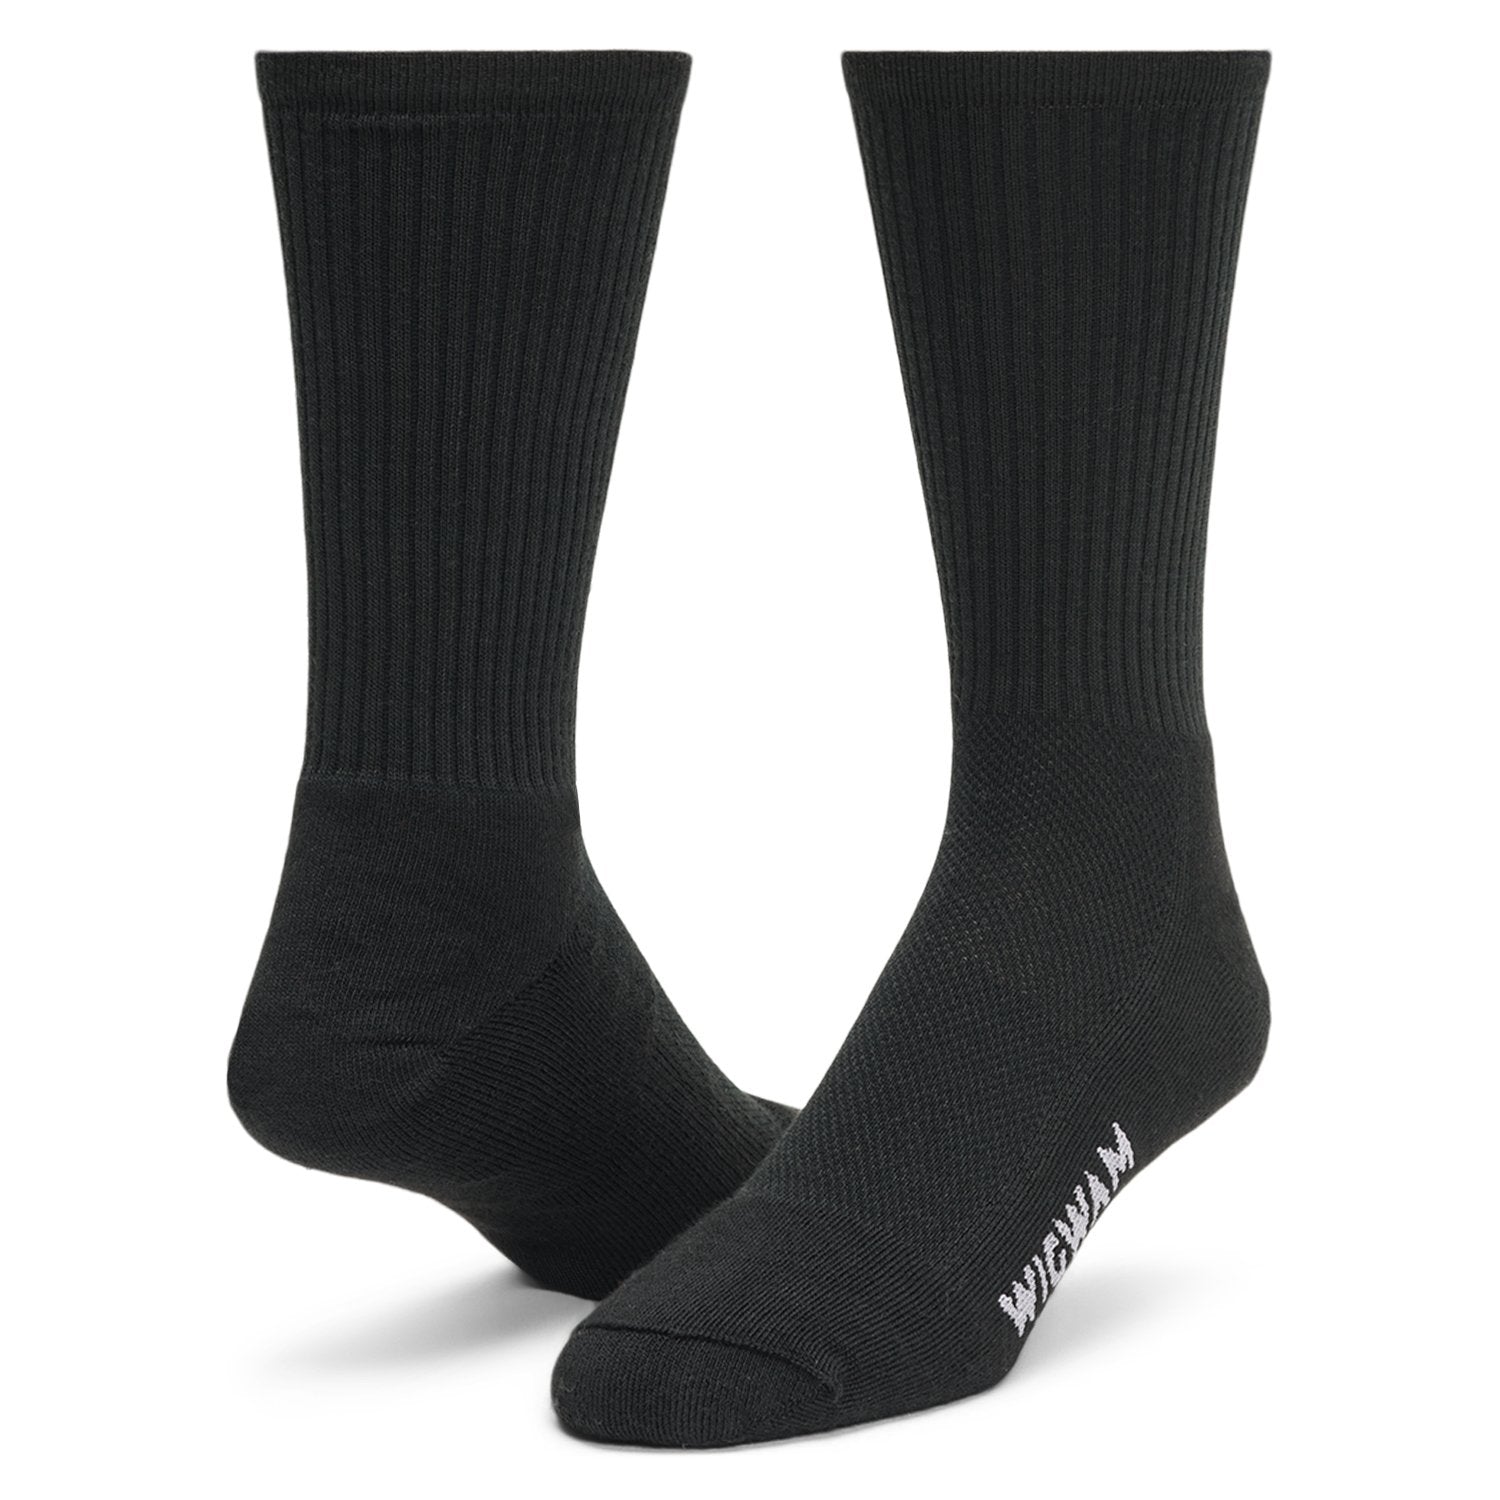 Hot Weather Dress Crew Sock - Black full product perspective - made in The USA Wigwam Socks